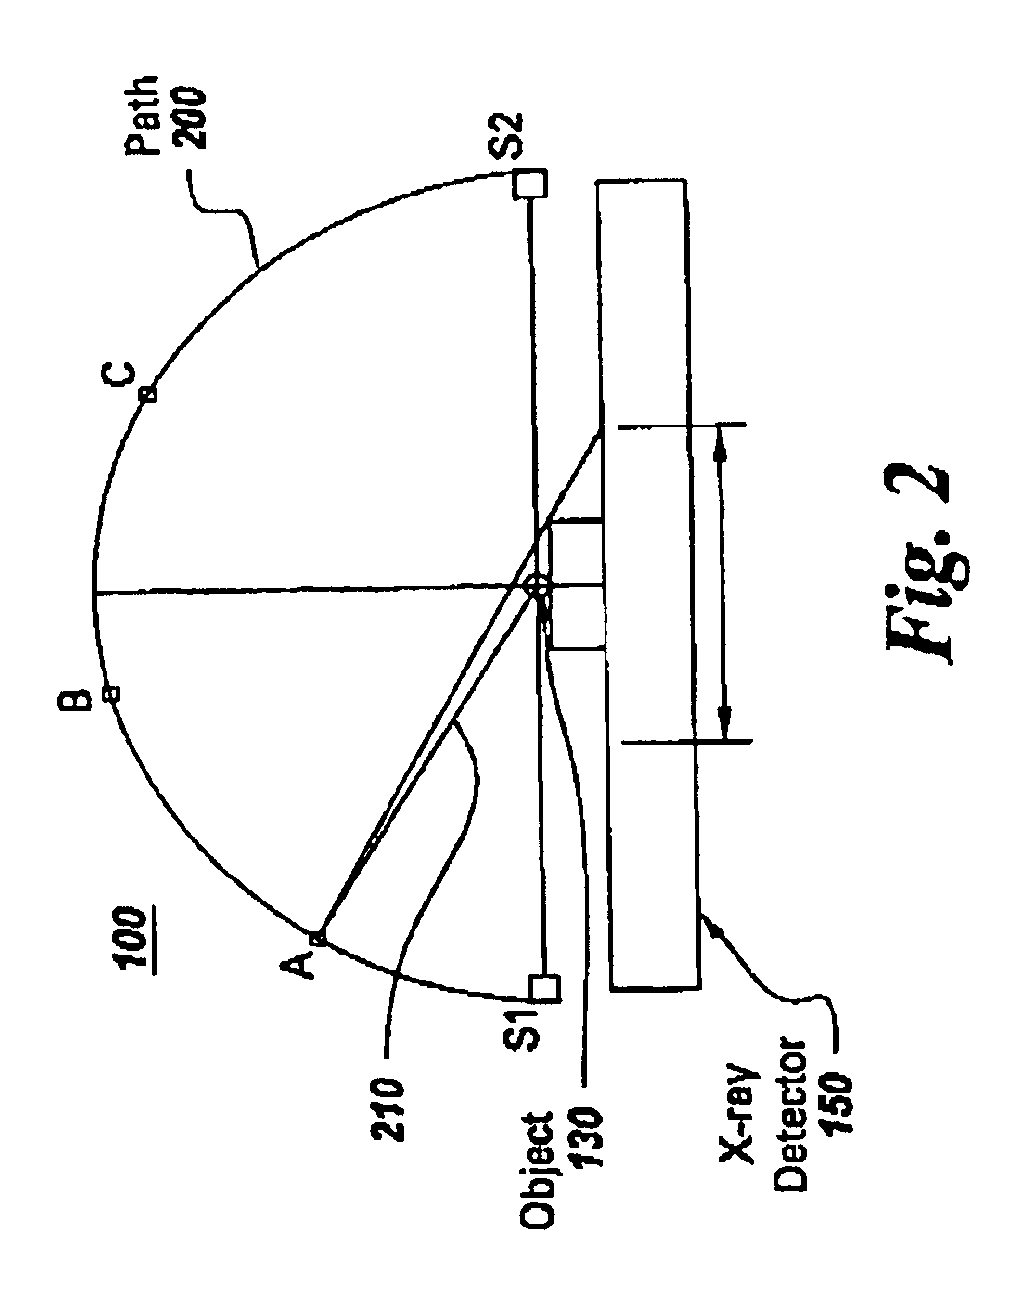 Continuous scan tomosynthesis system and method